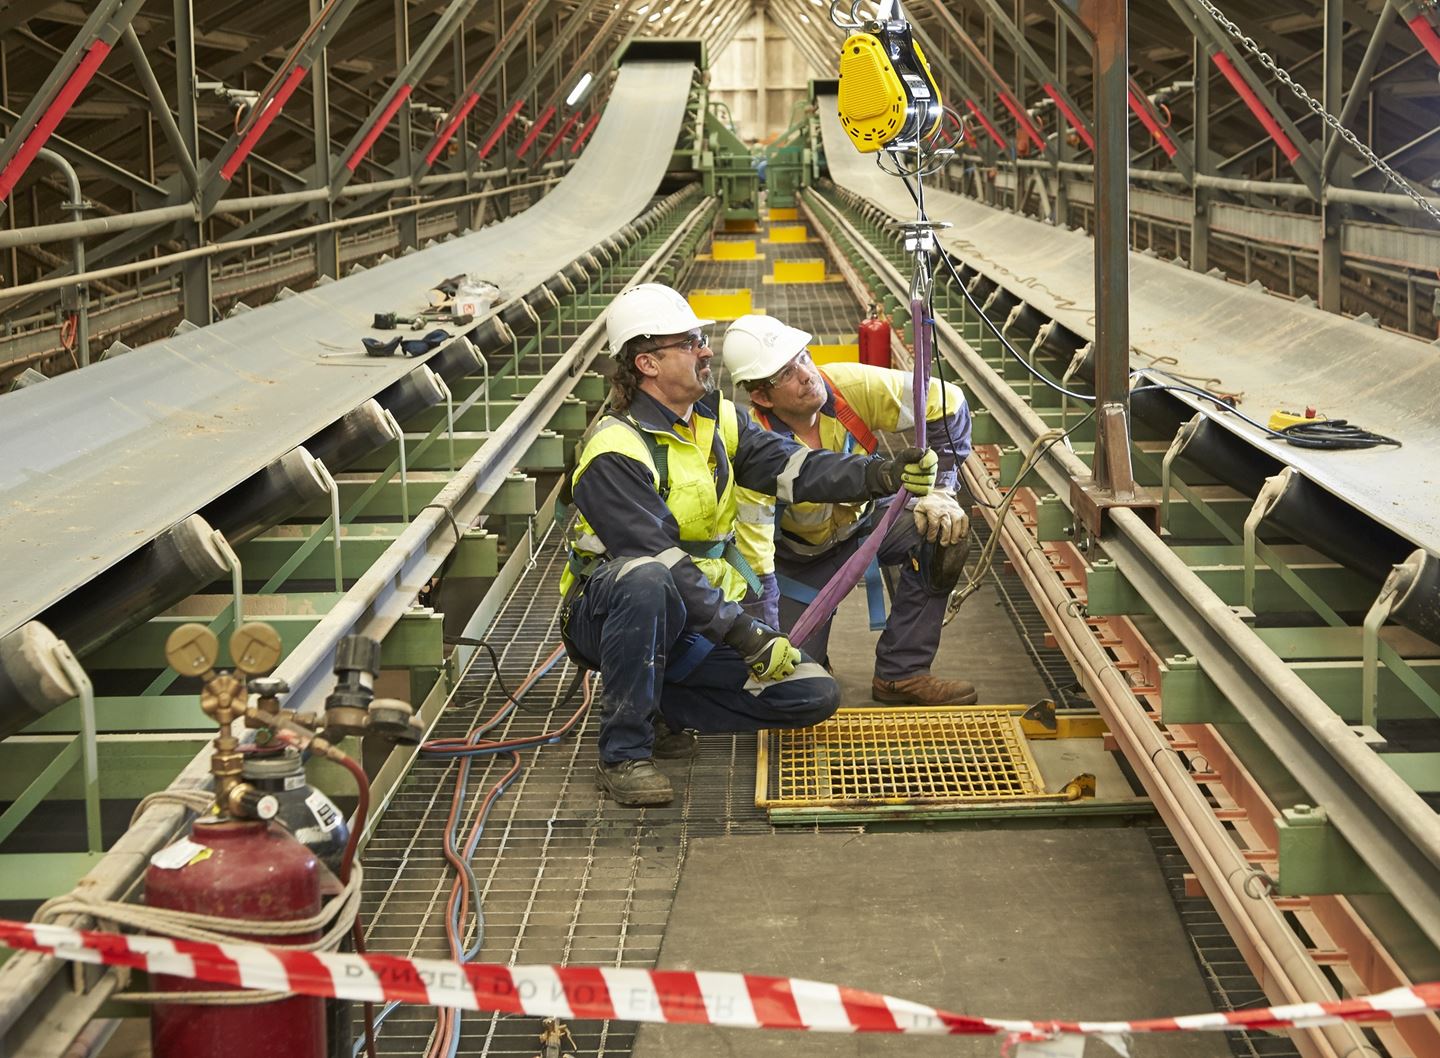 Two men in work clothing inspect a strap between two conveyor builts